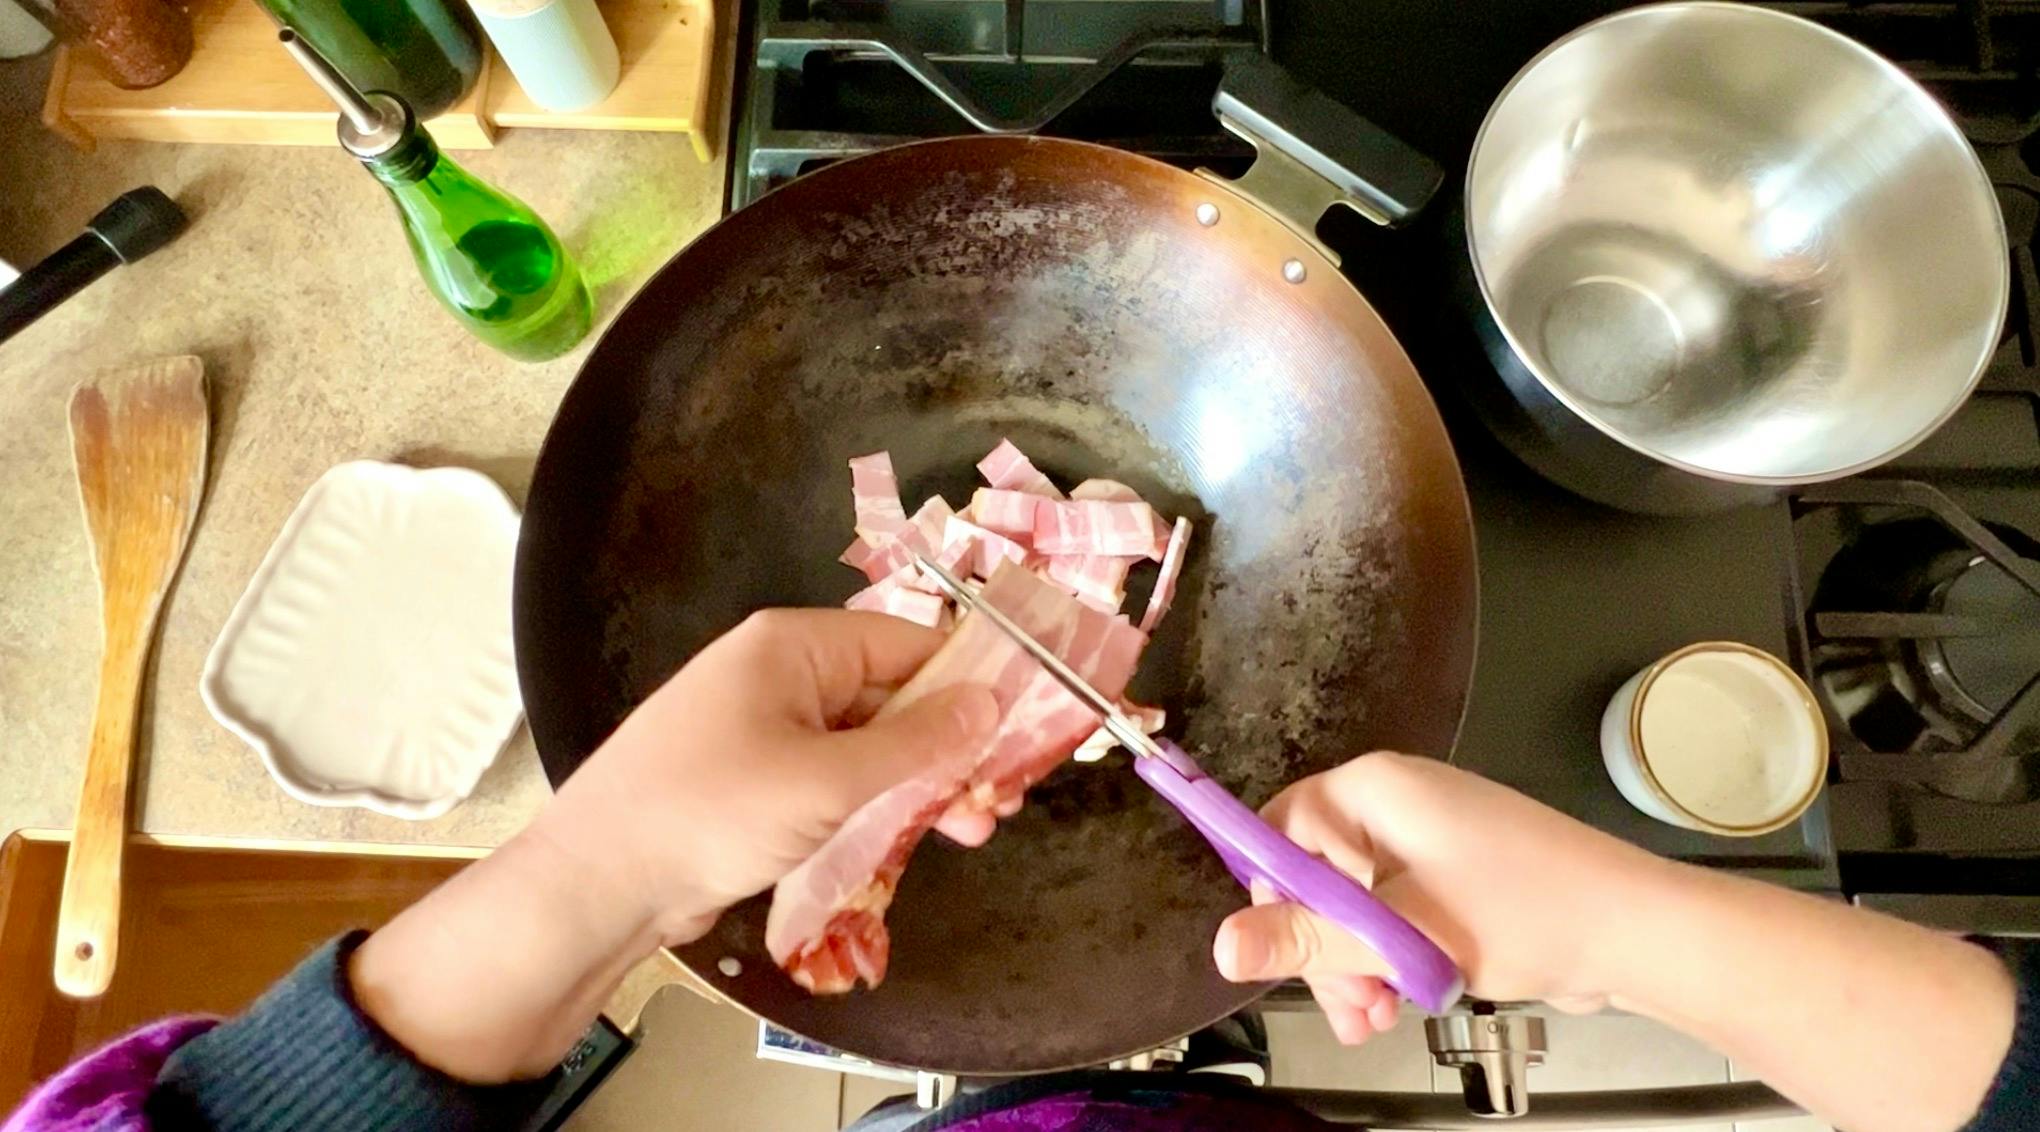 Cutting bacon into the wok.